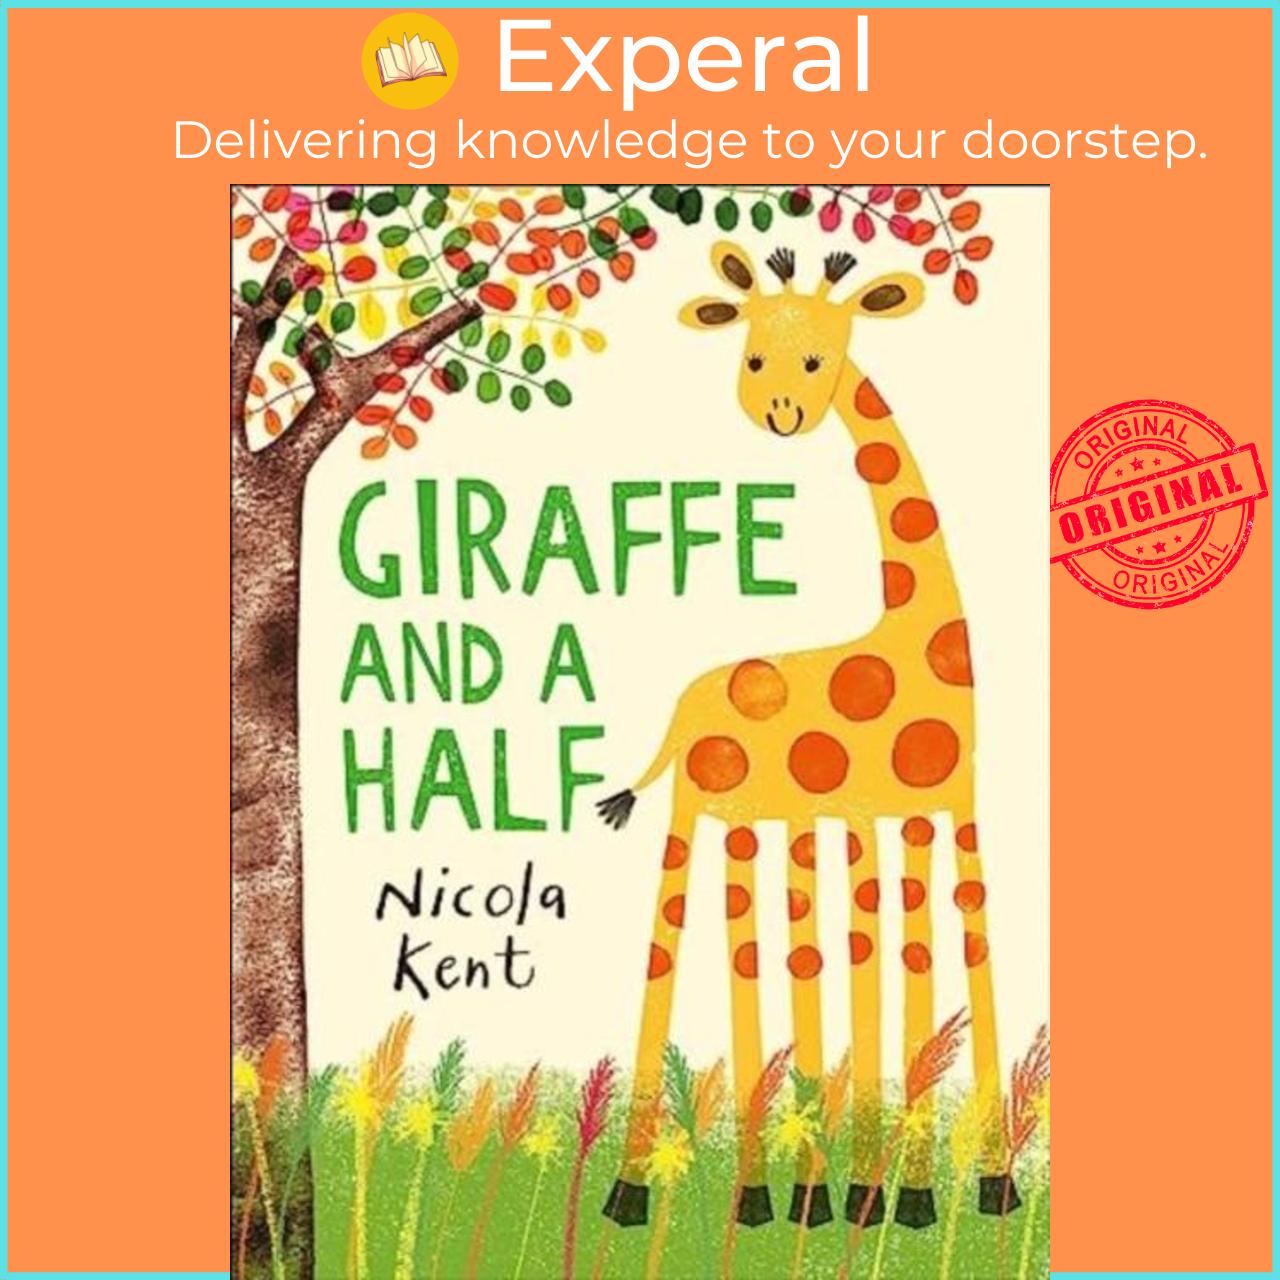 Sách - Giraffe and a Half by Nicola Kent (UK edition, hardcover)